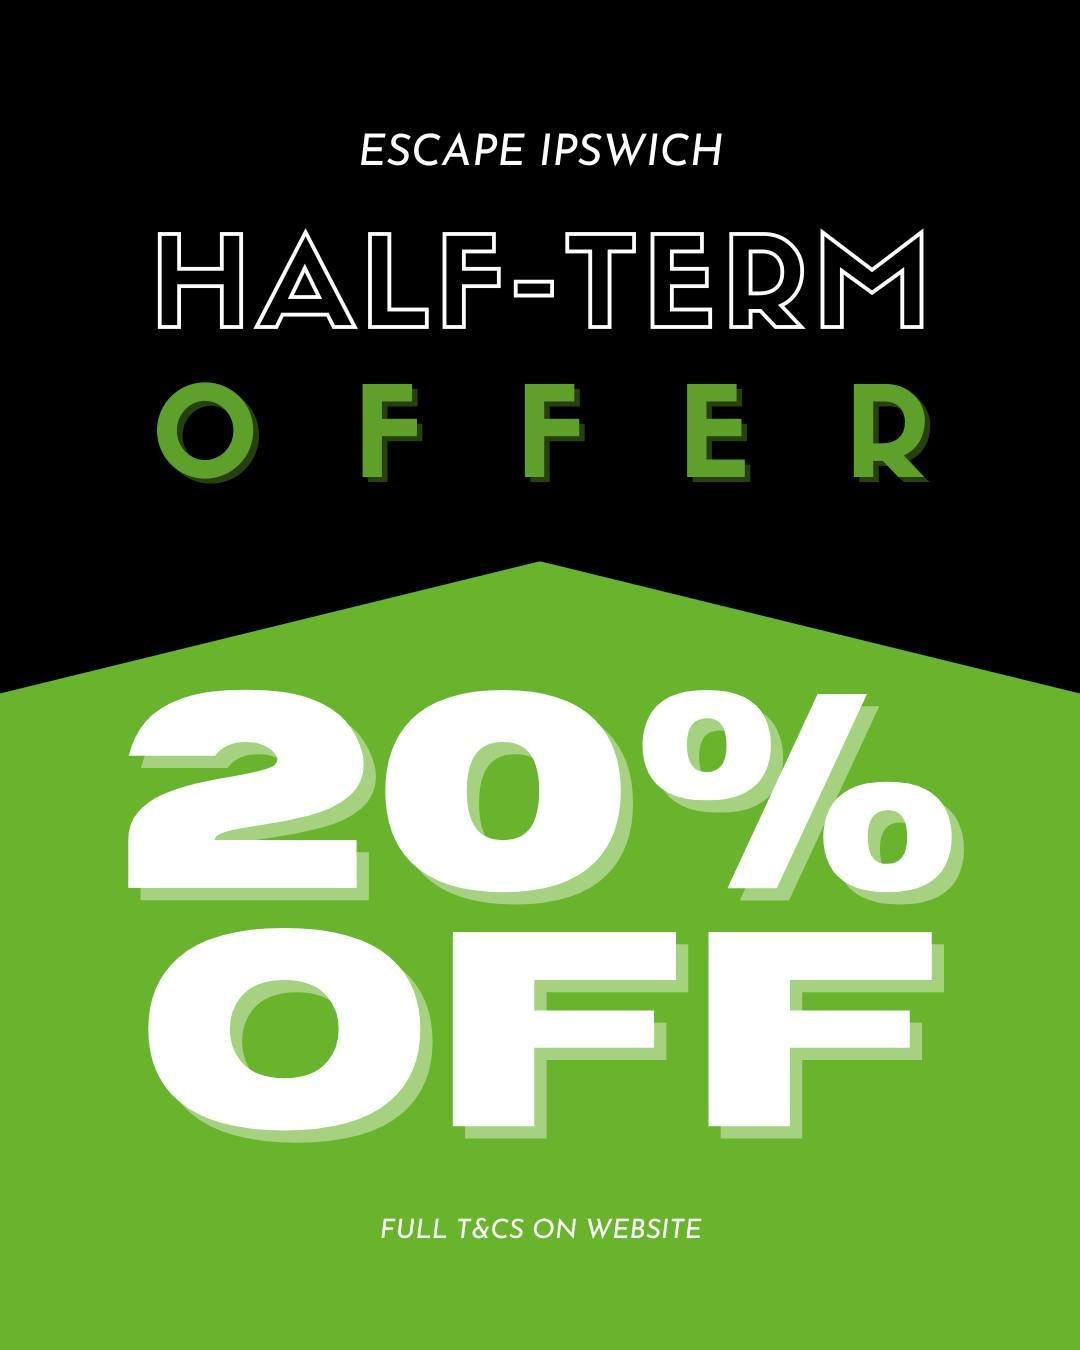 Looking for something fun to do this May half term with the kids? Or just with your mates?

Look no further, enjoy 20% off using code HALFTERM20! 

Head to our book page on our website for more information and full T&amp;Cs! Link in bio ☝️ 

#escapei